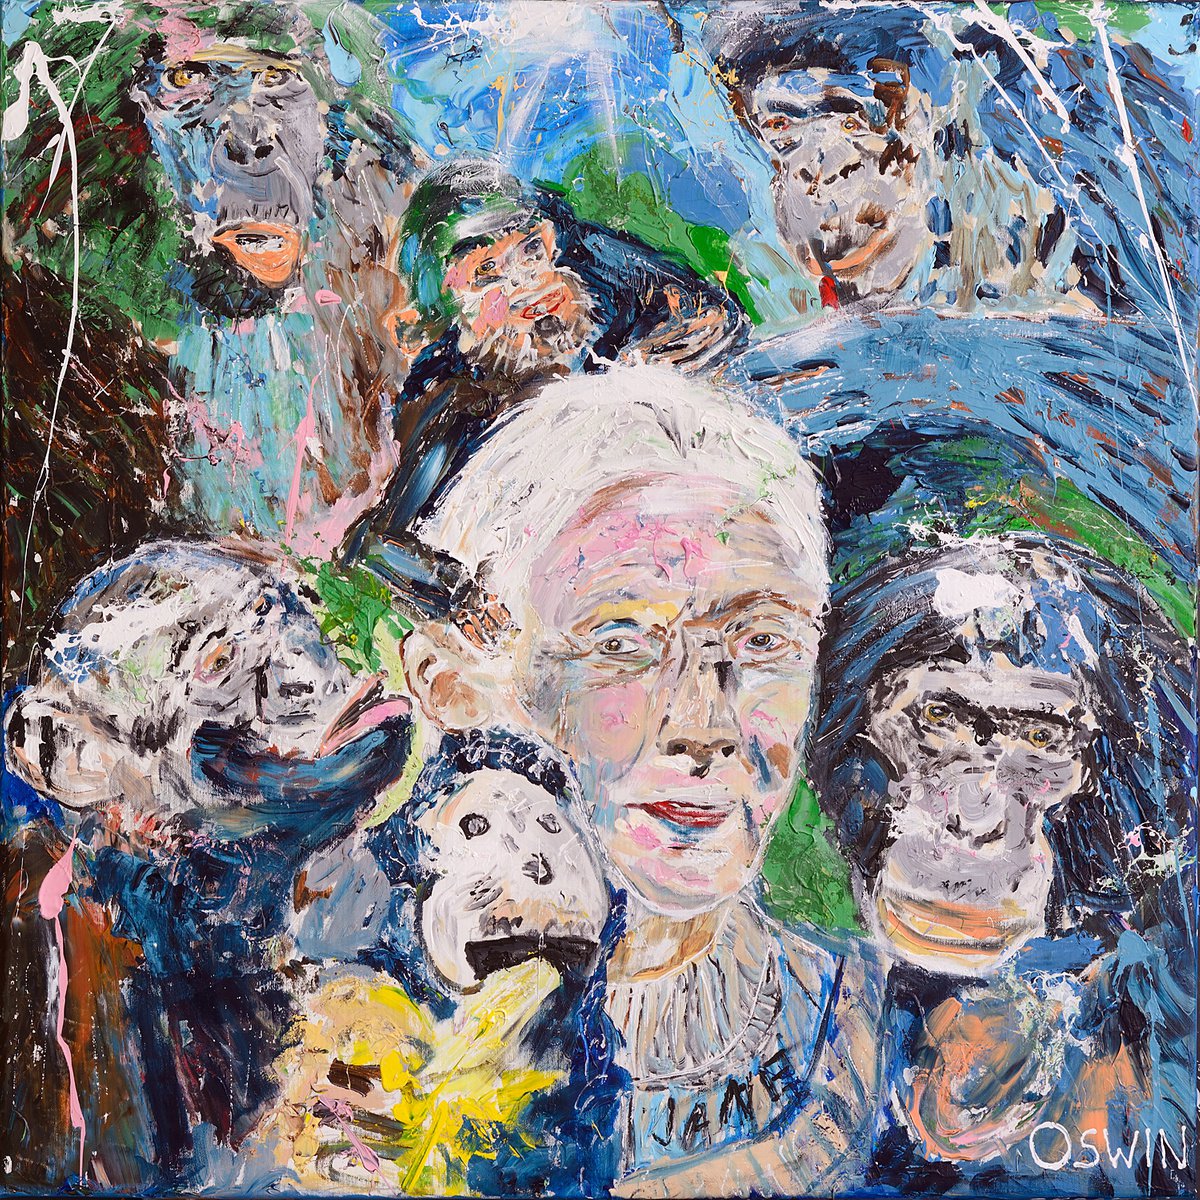 Portrait JANE GOODALL AND HER CHIMPS 100 x 100 cm.| 39.37 x 39.37 portrait Jane Goodall... by Oswin Gesselli